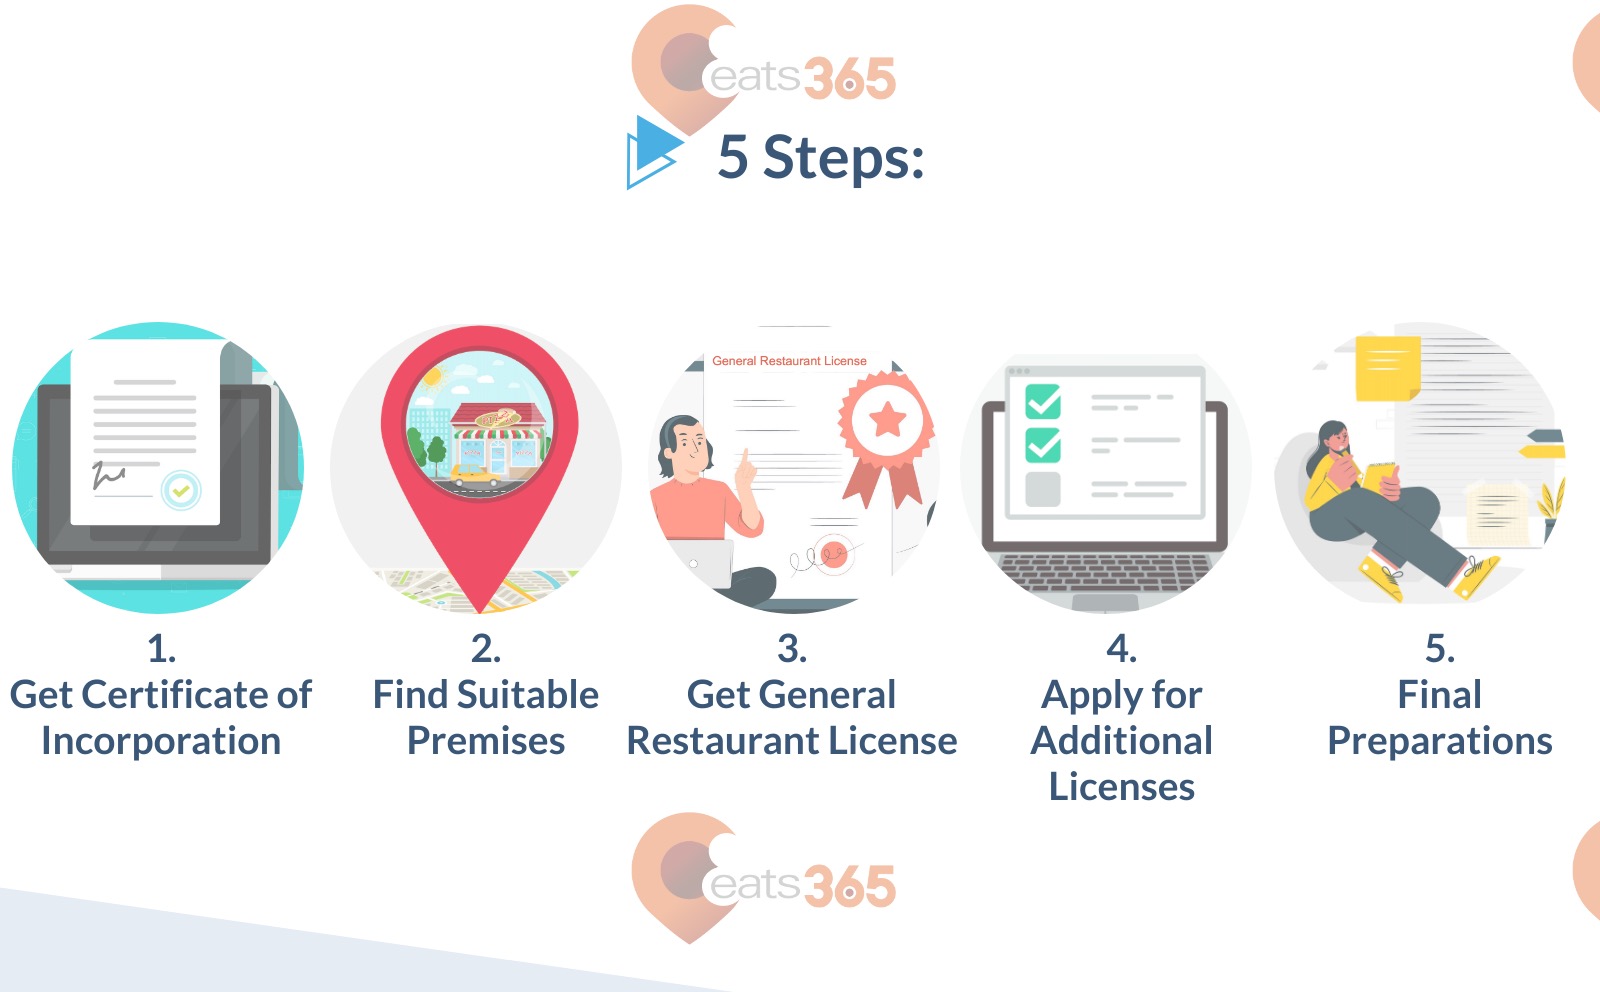 5 steps to apply for Hong Kong business license